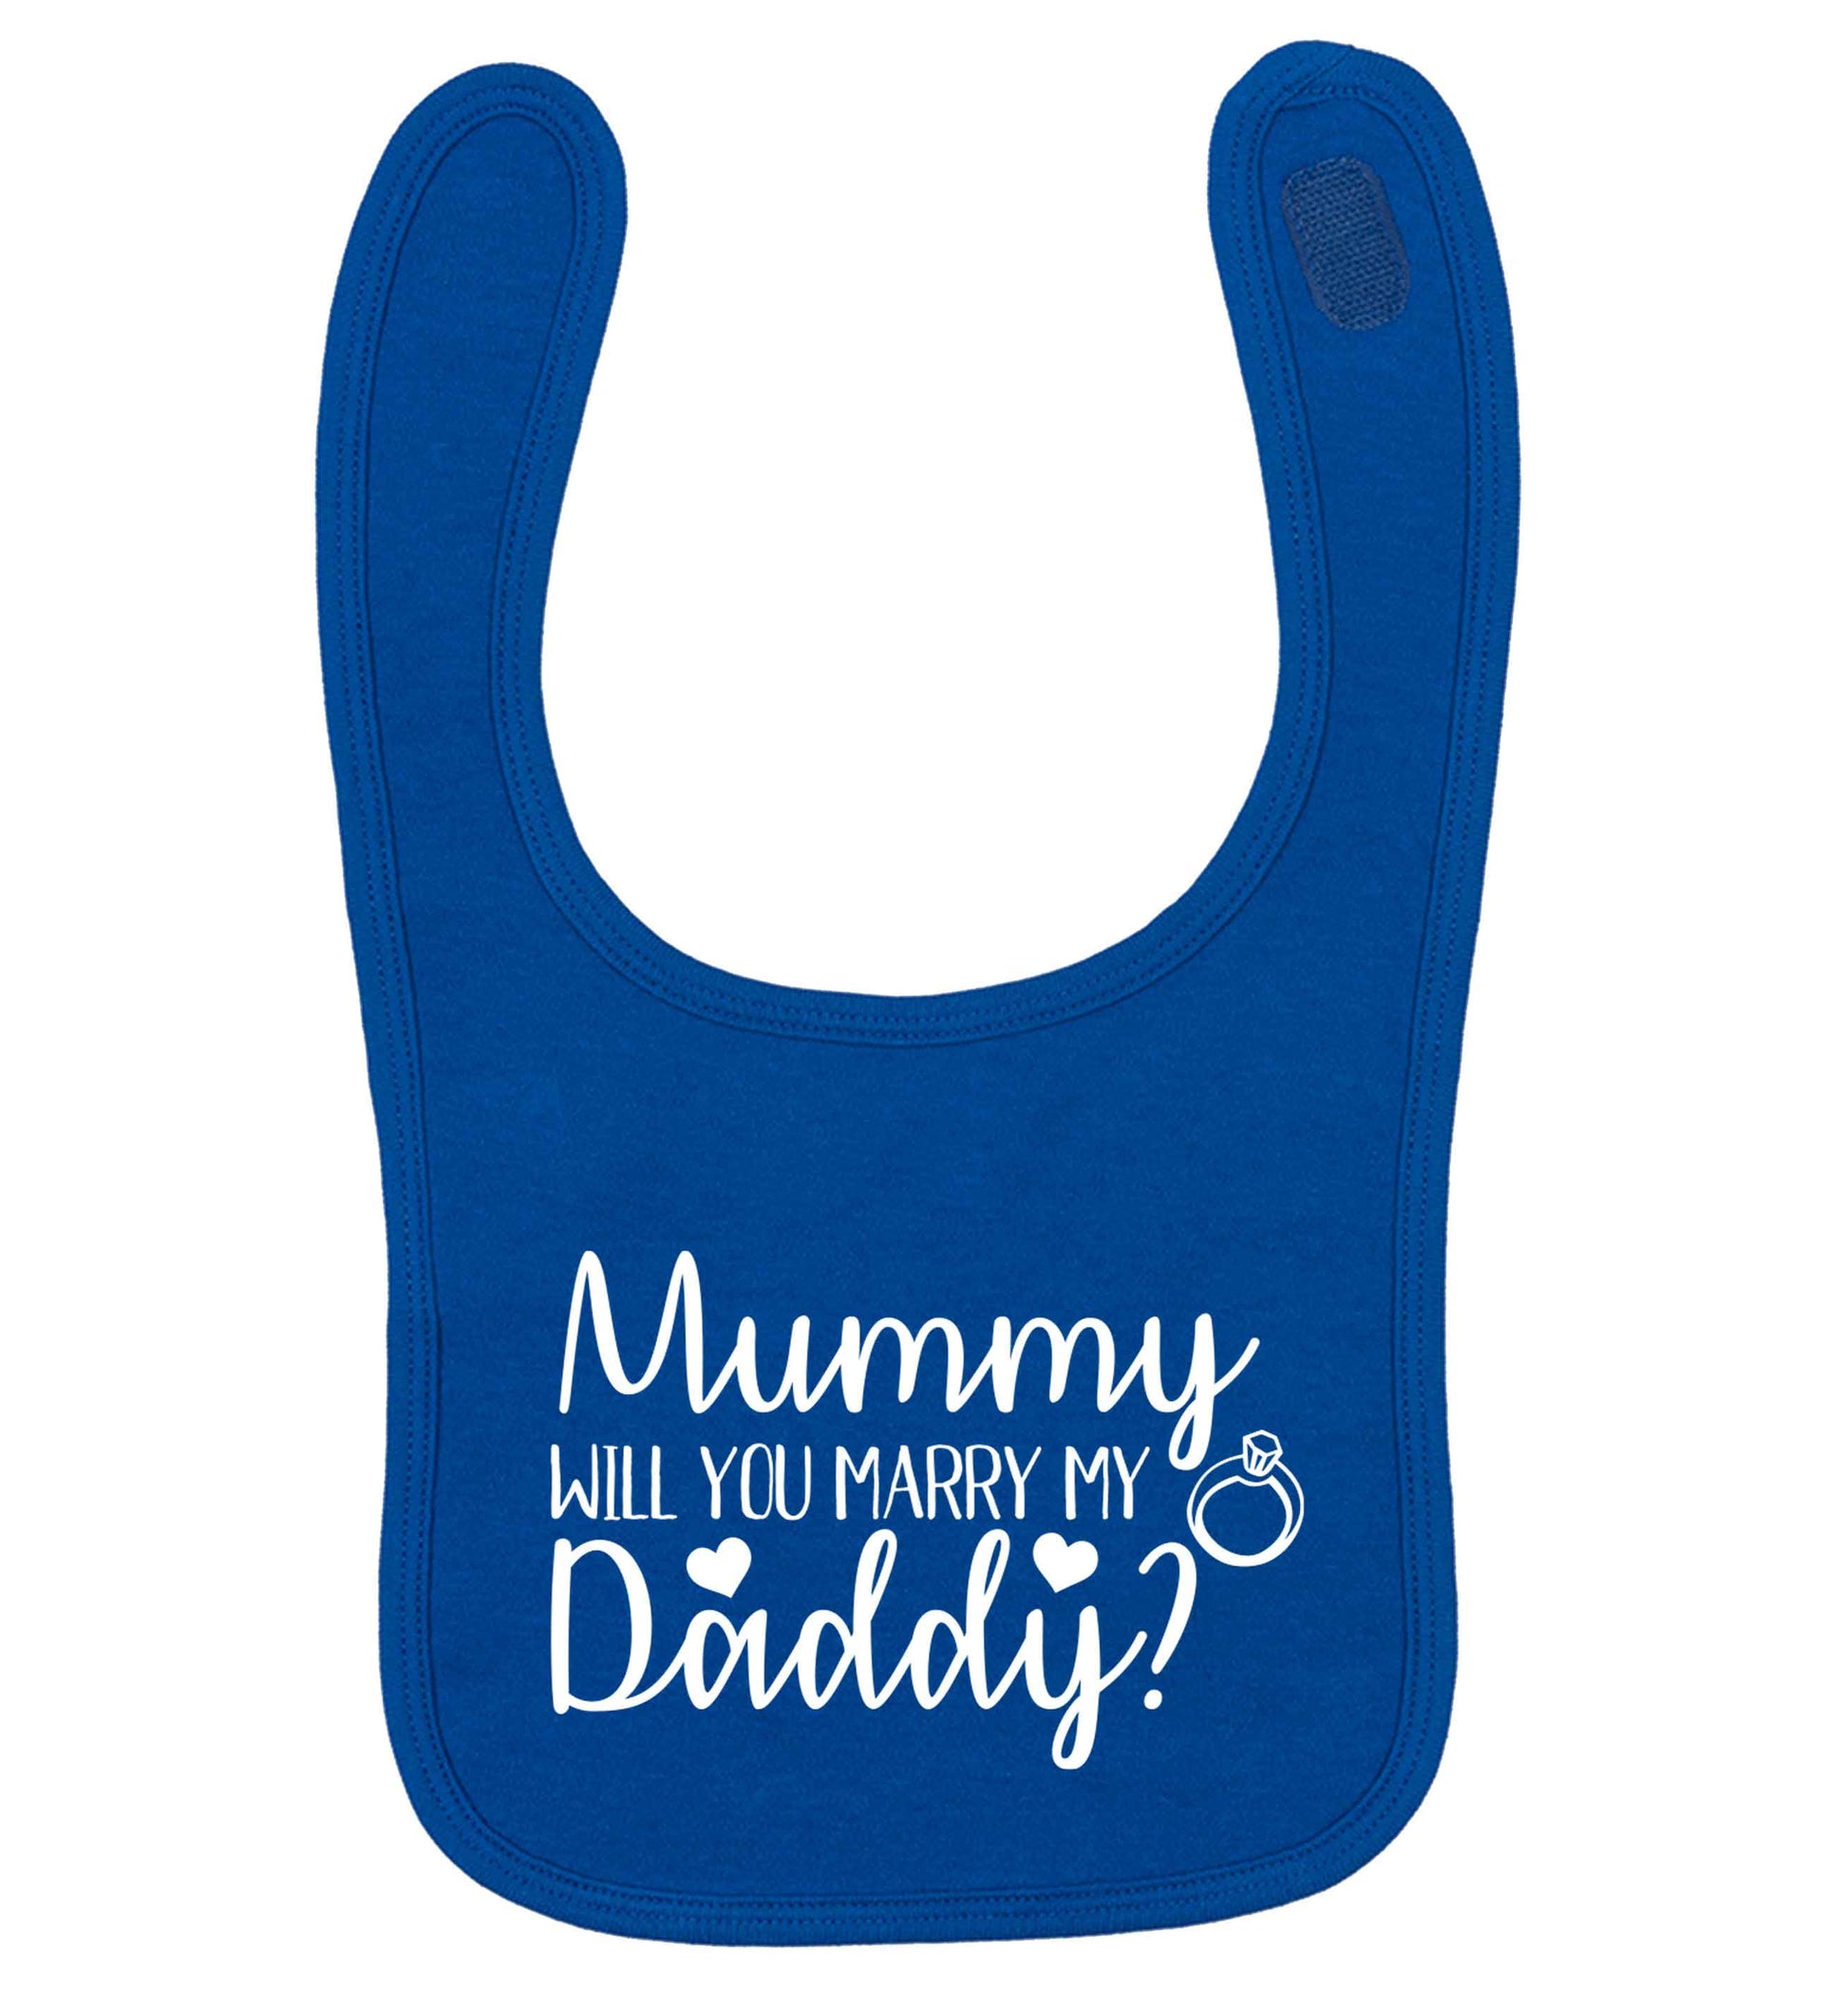 Looking for a unique way to pop the question? Why not let your kids do it!  royal blue baby bib